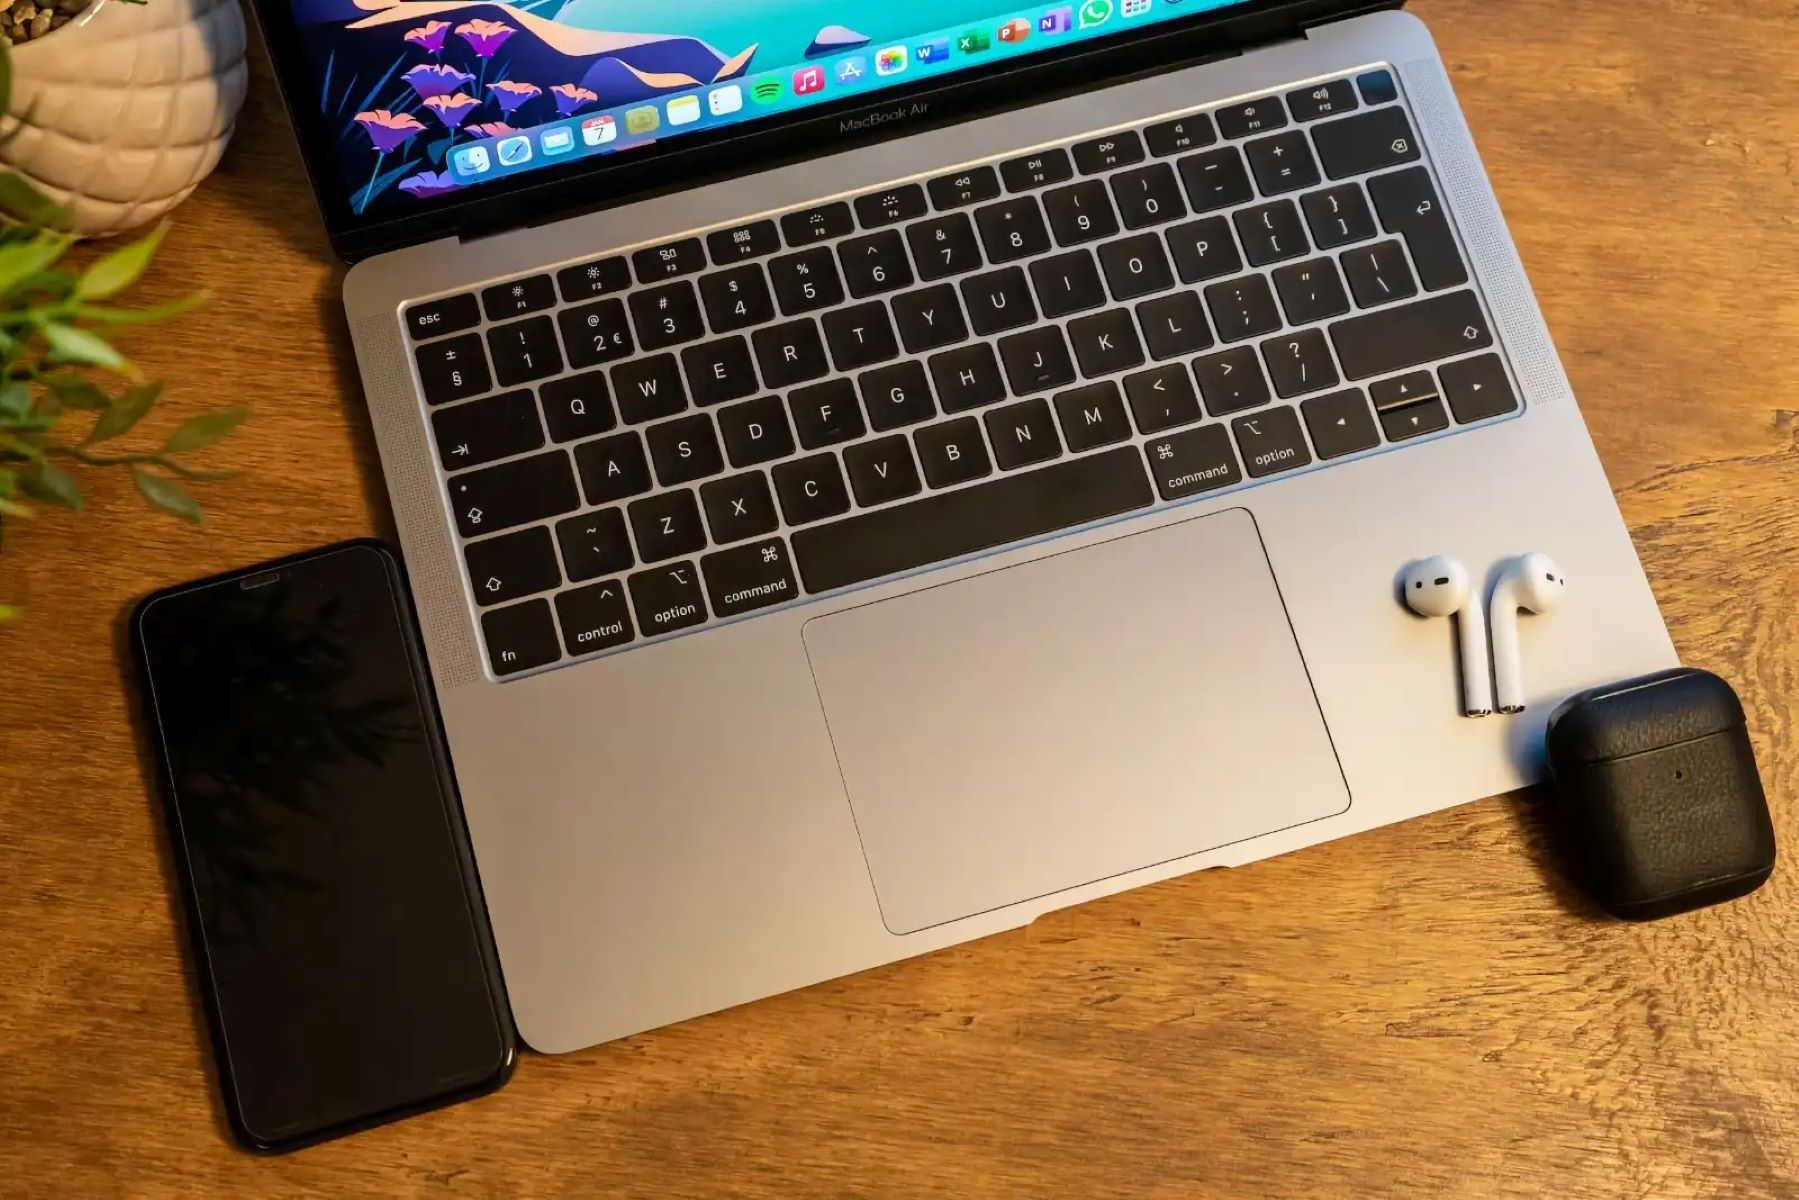 Device Connection: Connecting IPhone 12 To MacBook Air